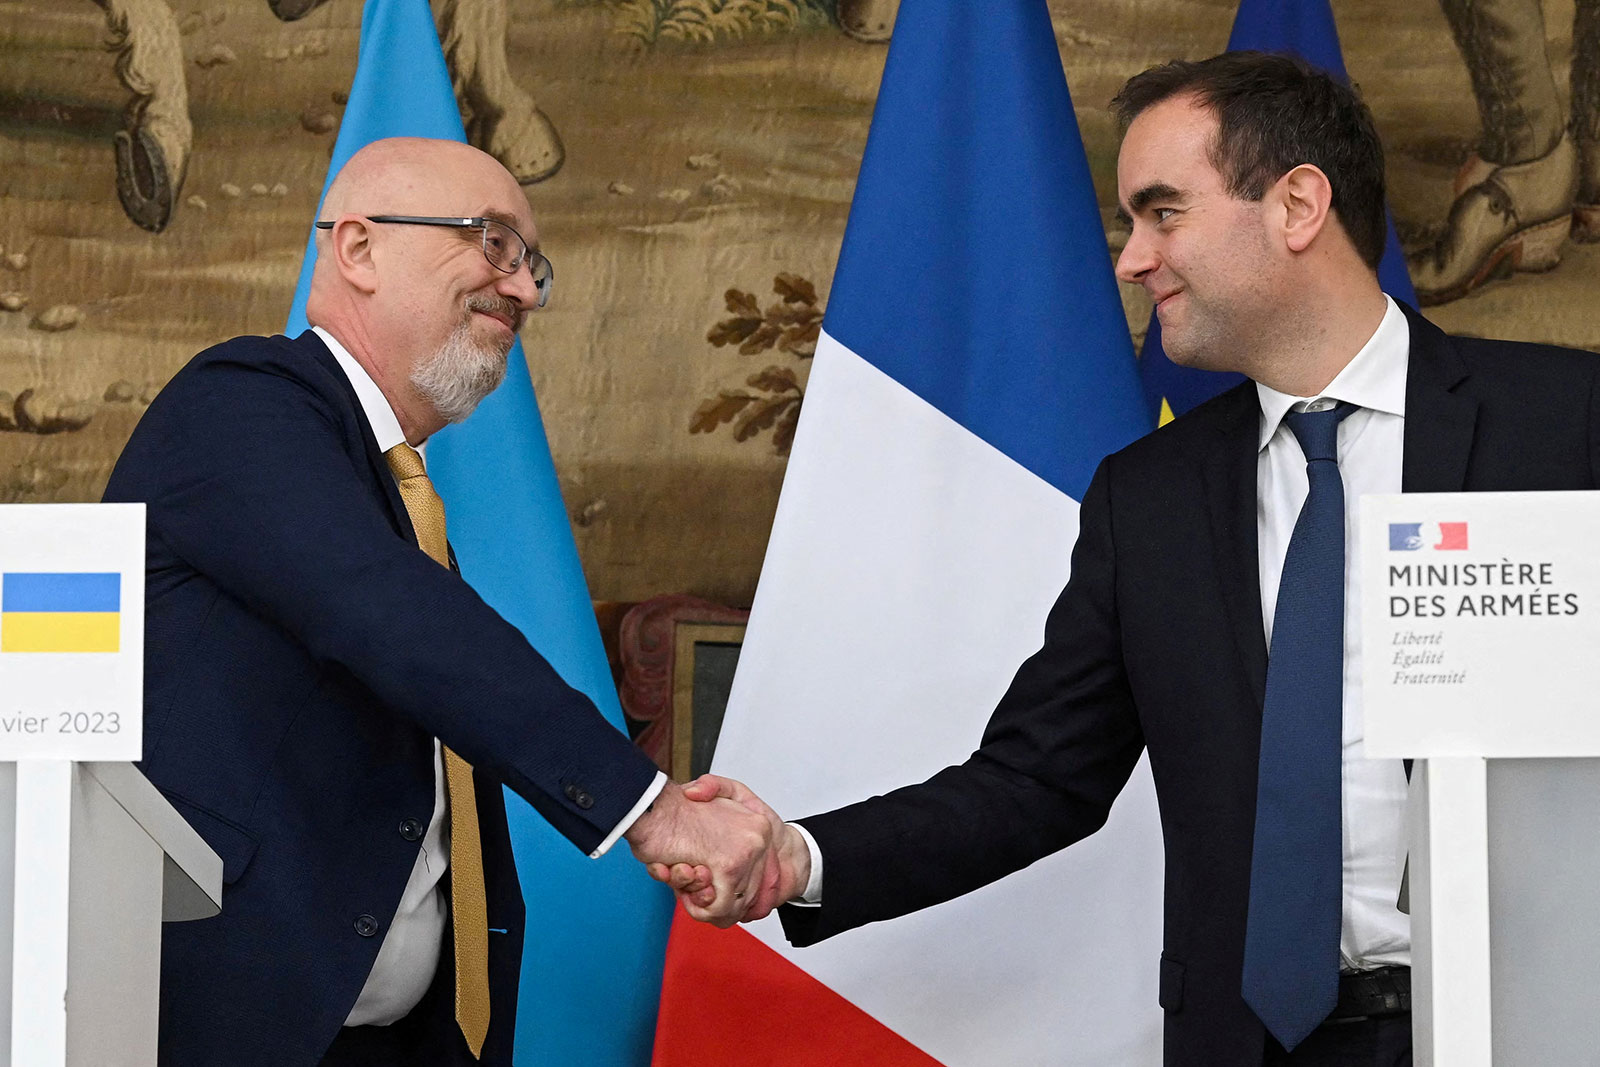 Ukrainian Defense Minister Oleksii Reznikov shakes hands with French Minister of the Armed Forces Sébastien Lecornu during a press conference in Paris on January 31. 